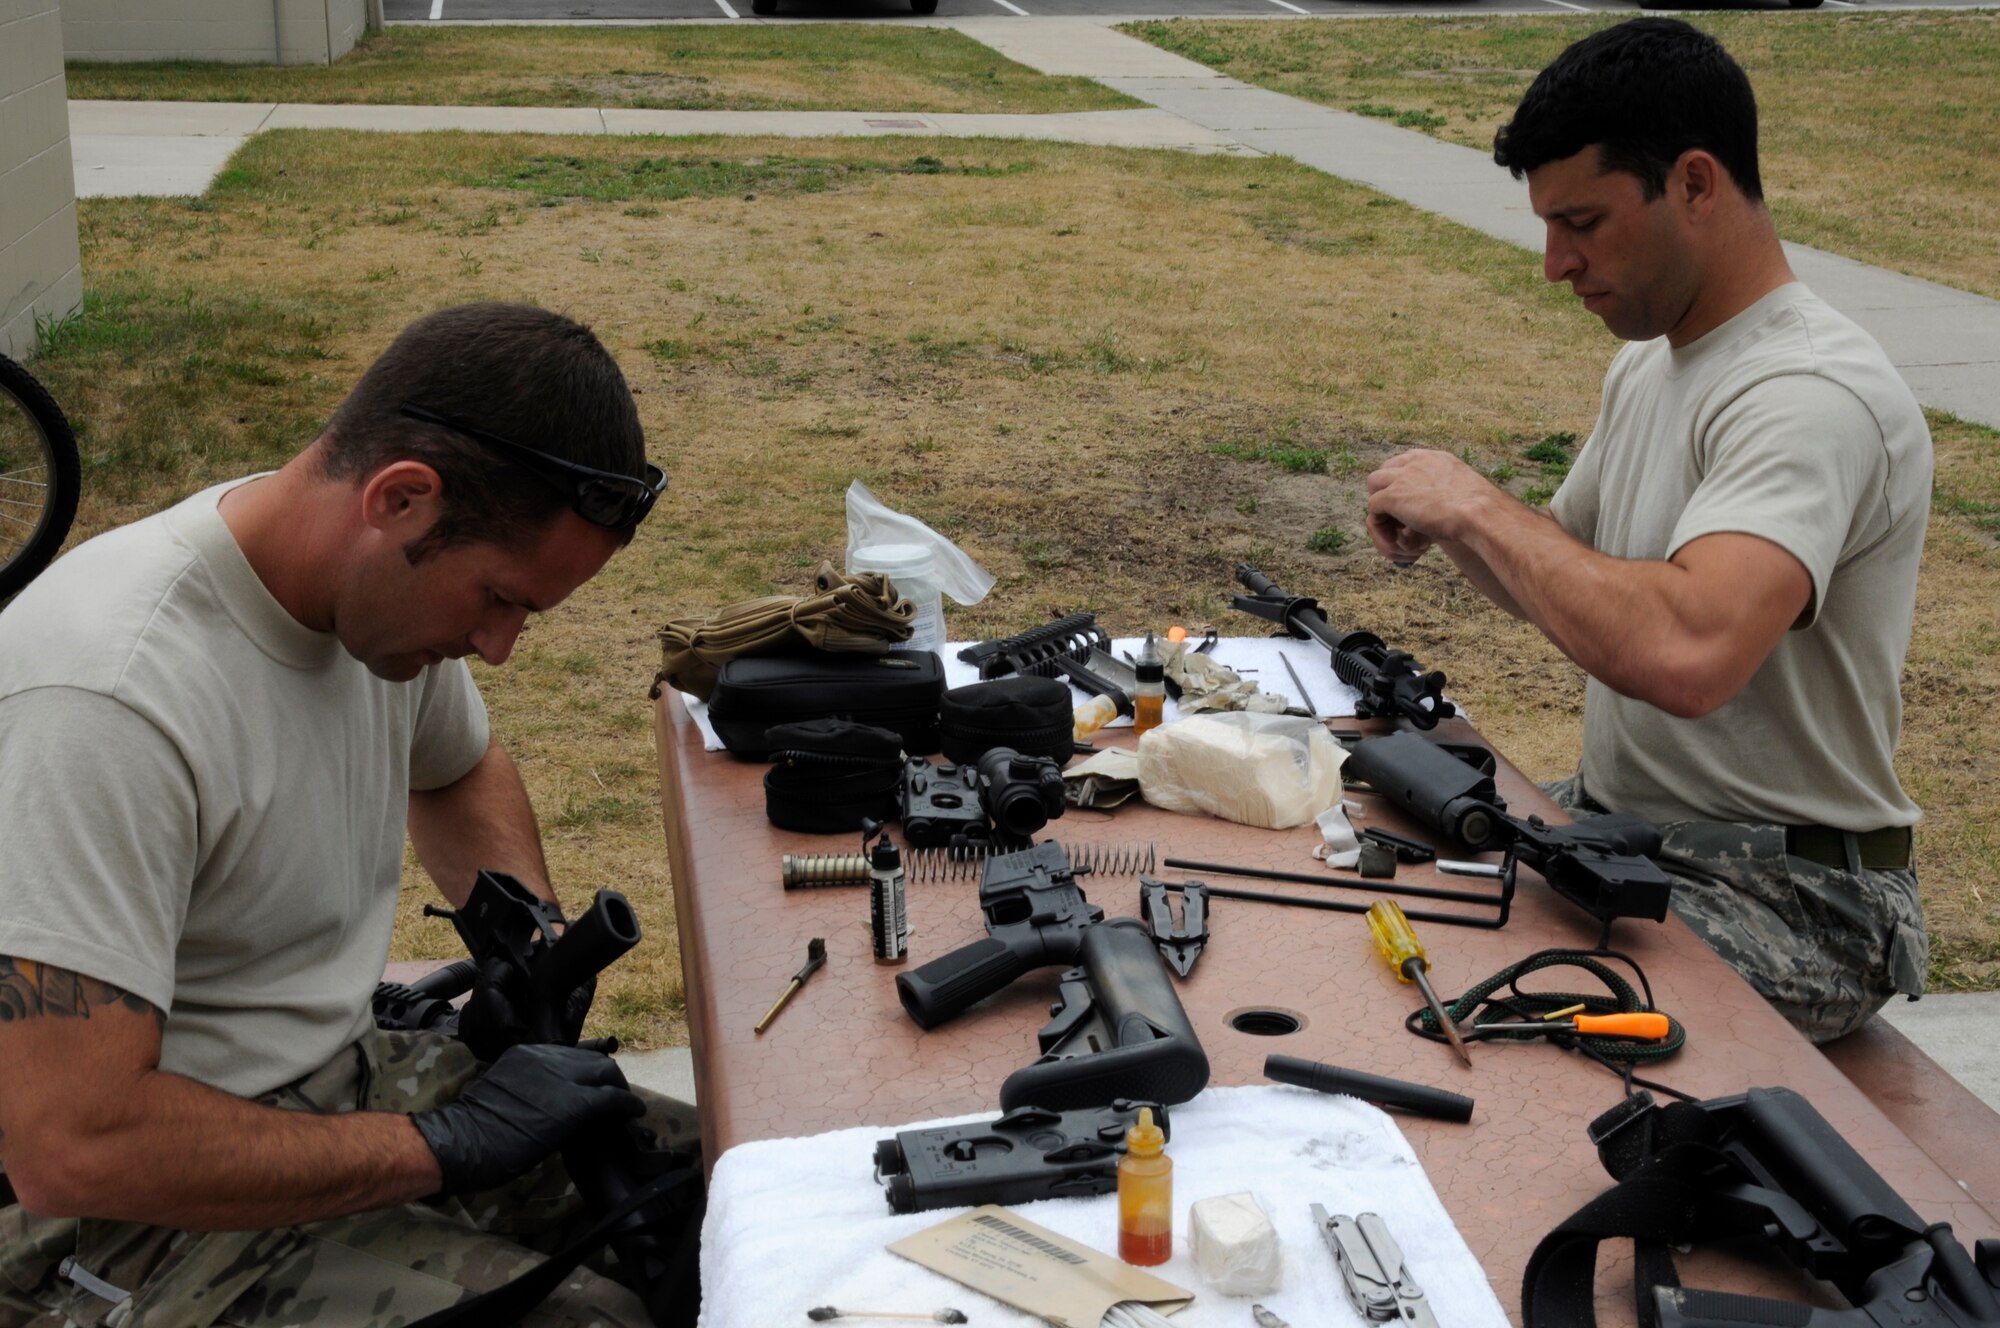 Technical Sgt. Lyle Black and Staff Sgt. Brian Glynn from Selfridge Air National Guard Base, 107th Weather Flight, disassemble their M-4 rifles for cleaning after a day on the shooting range during the annual Gray Wolverine training exercise held at Combat Readiness Training Center Alpena Michigan, July 24, 2011. Black and Glynn regularly disassemble and reassemble their weapons for cleaning to keep them in proper working order. (U.S. Air Force photo by TSgt David Kujawa)